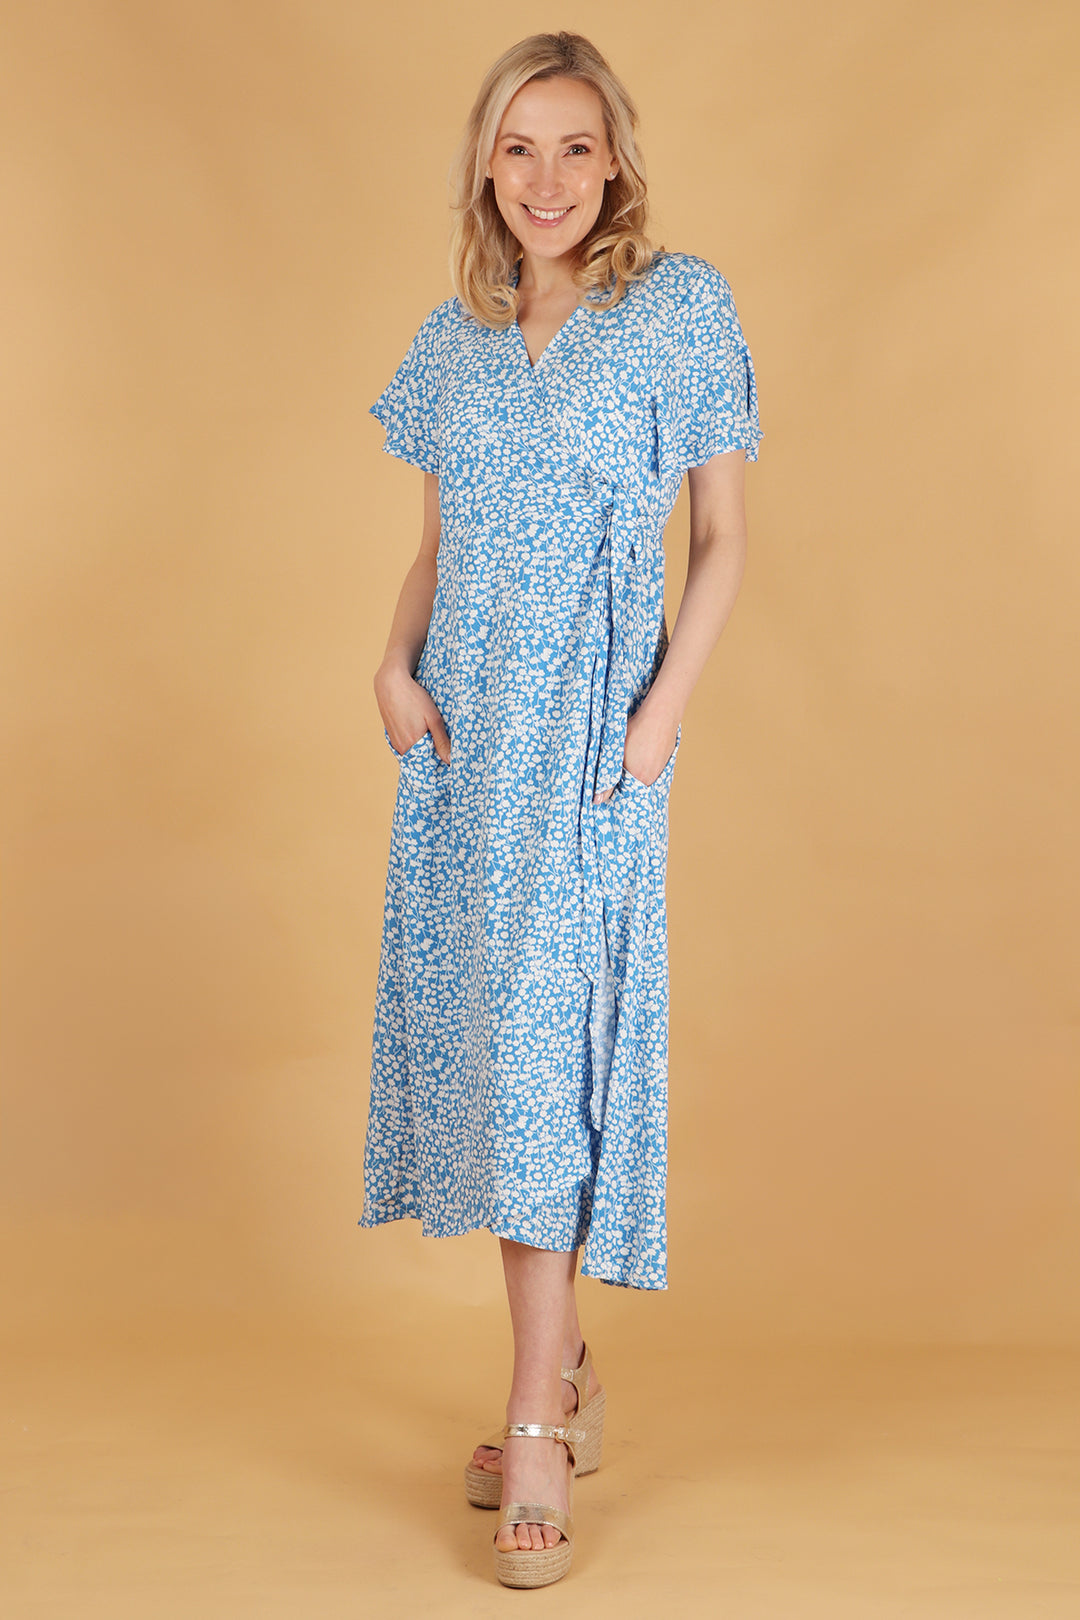 model wearing a blue and white ditsy floral pattern midi length wrap dress with a v neck and short sleeves